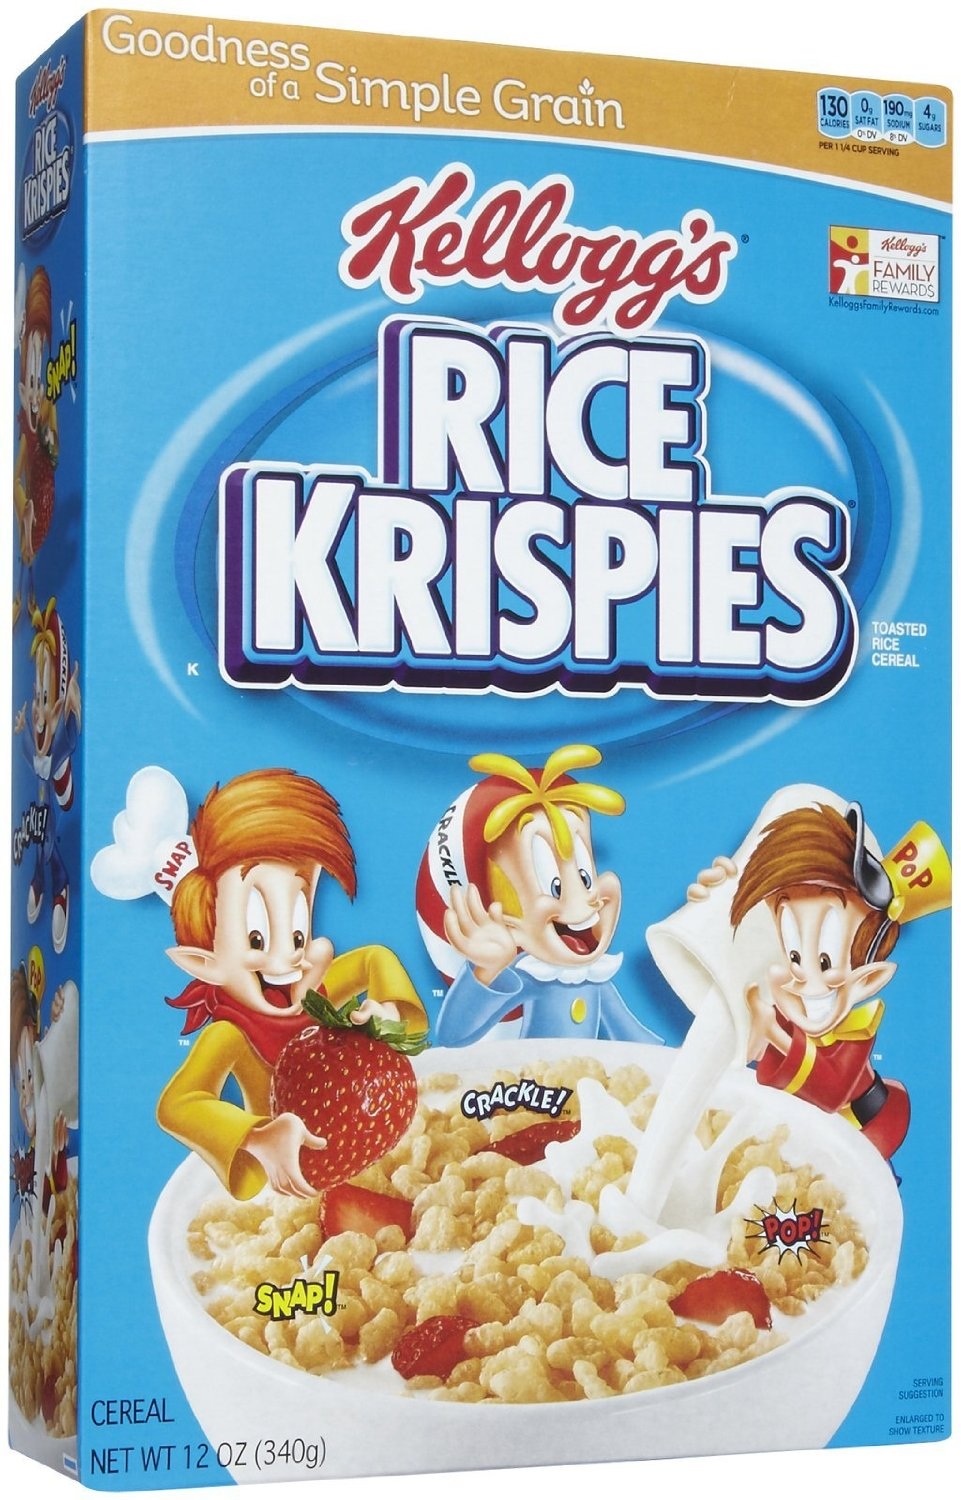 Cereal - Wikipedia